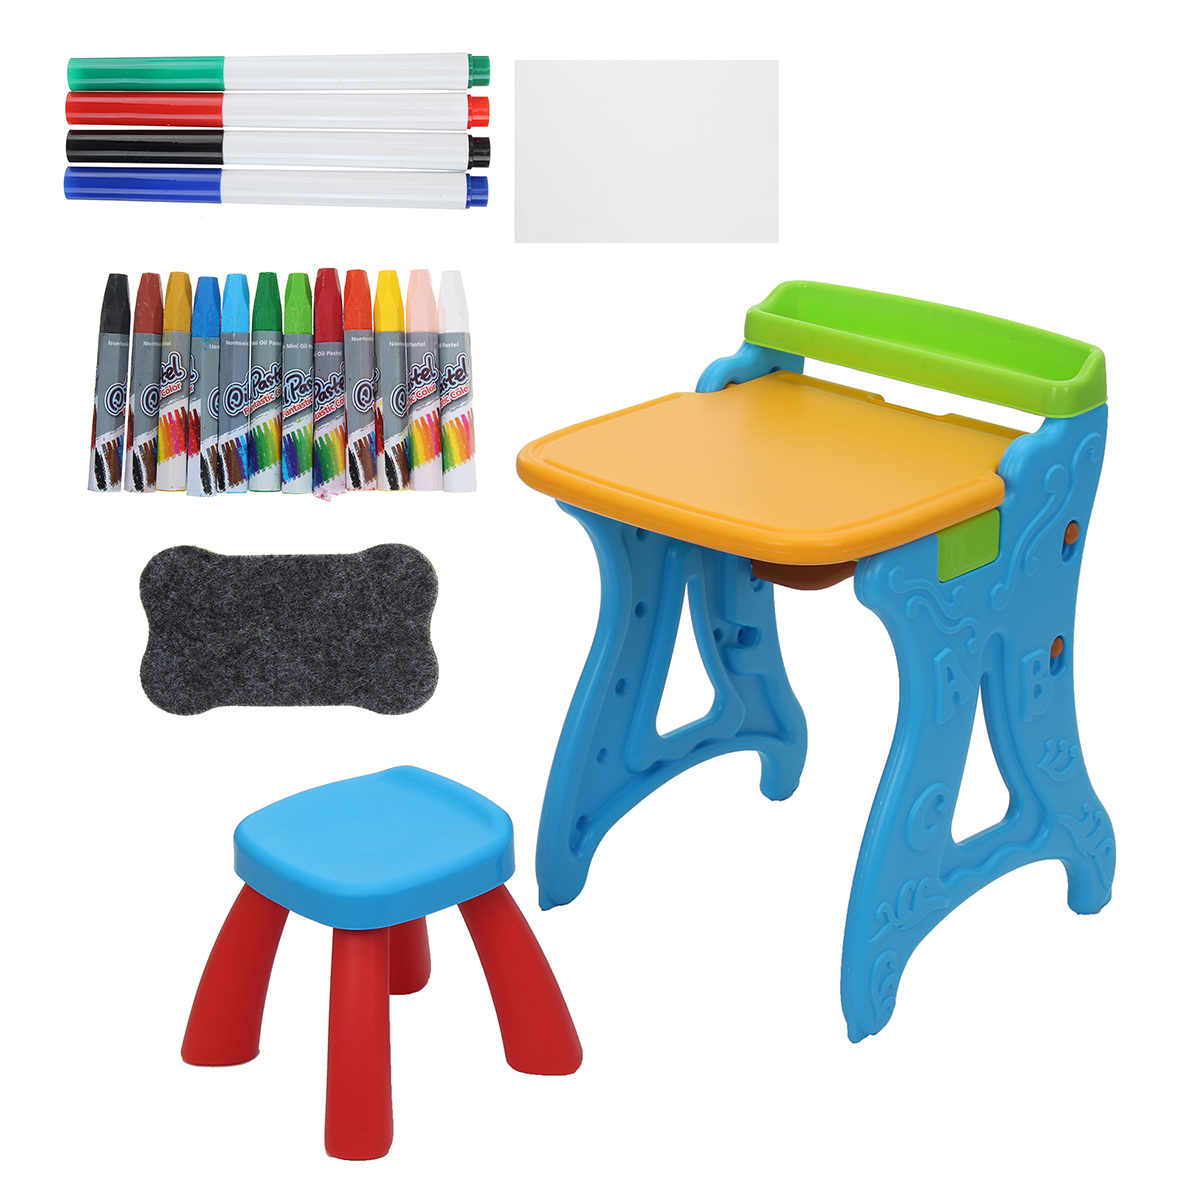 2-in-1-Folding-Drawing-Board-Table-Set-with-a-Kid-Sized-Stool-Plastic-Magnetic-Writing-White-Board-I-1853465-12